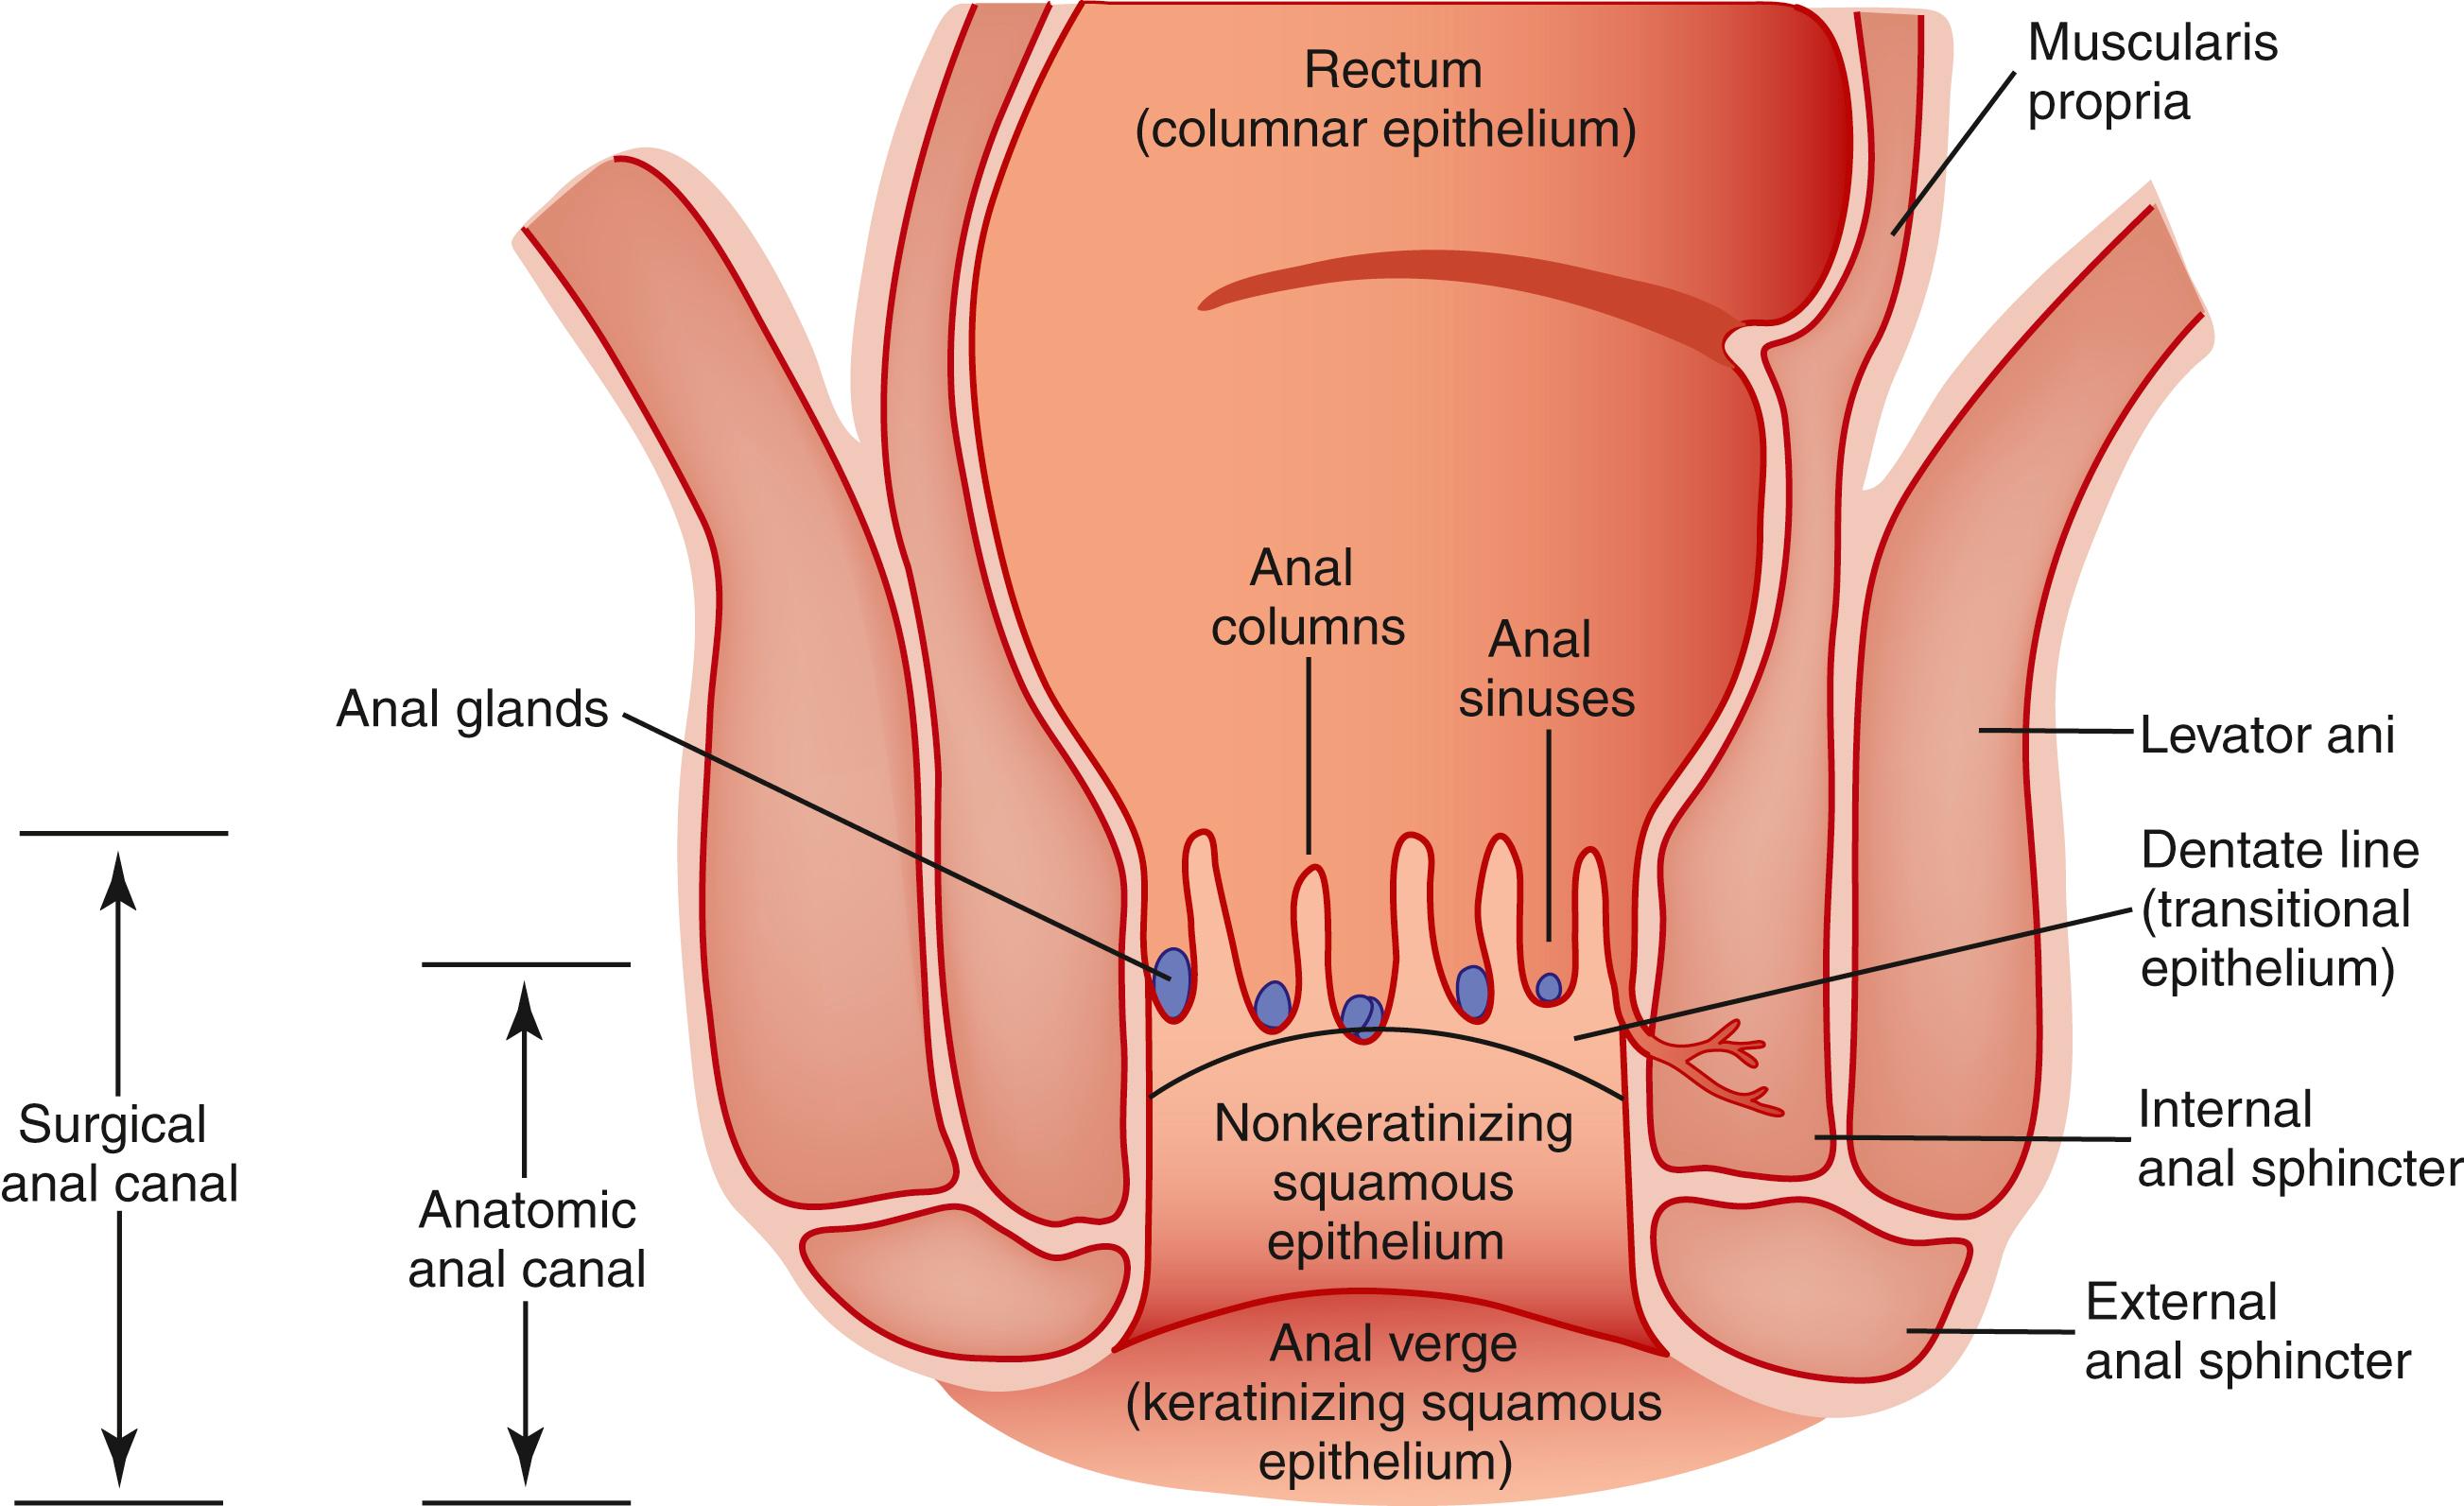 FIGURE 32.1, Anatomical features of the anal canal.